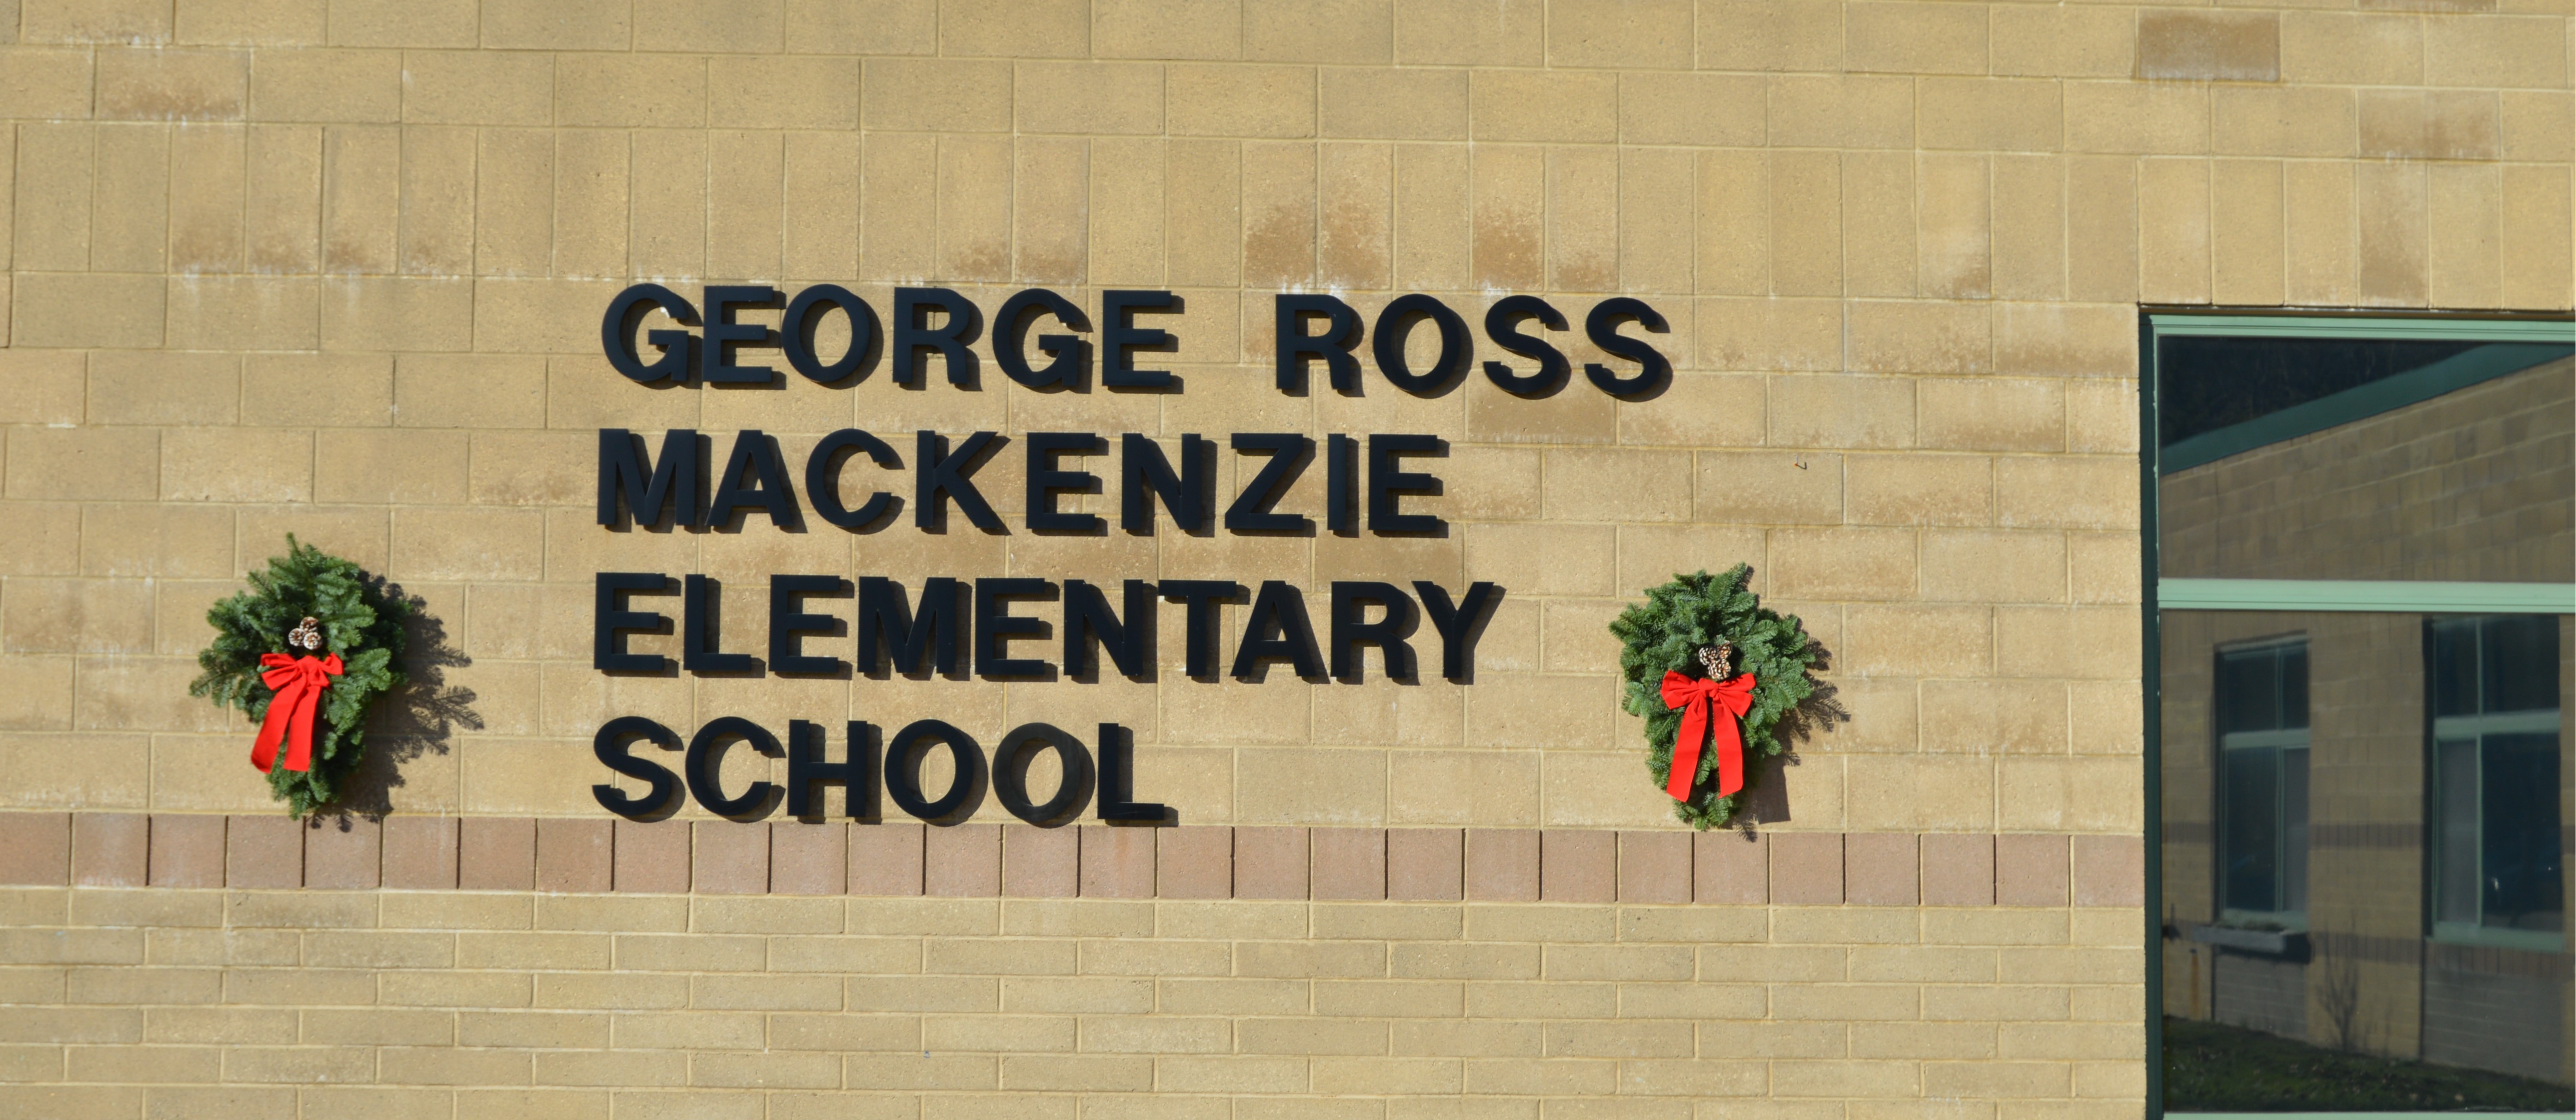 George Ross Mackenzie Elementary School main entrance decorated with 2 green wreaths with pine cones and red bows